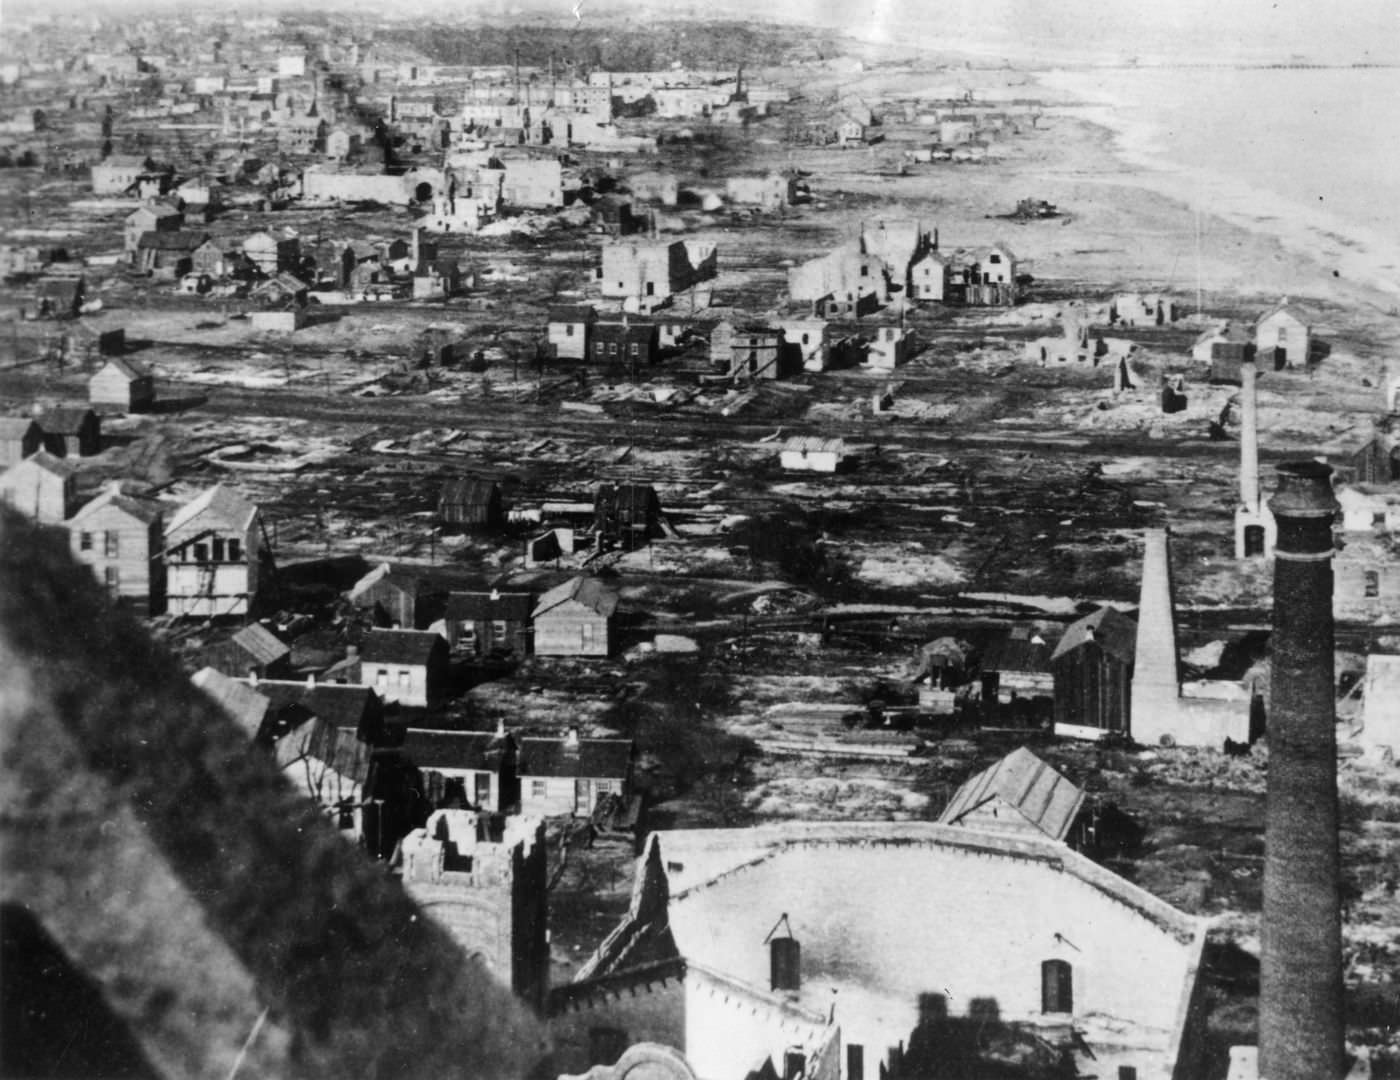 The view looking directly north from the Water Tower after the Great Chicago Fire of 1871. Photo taken circa 1871-1872.